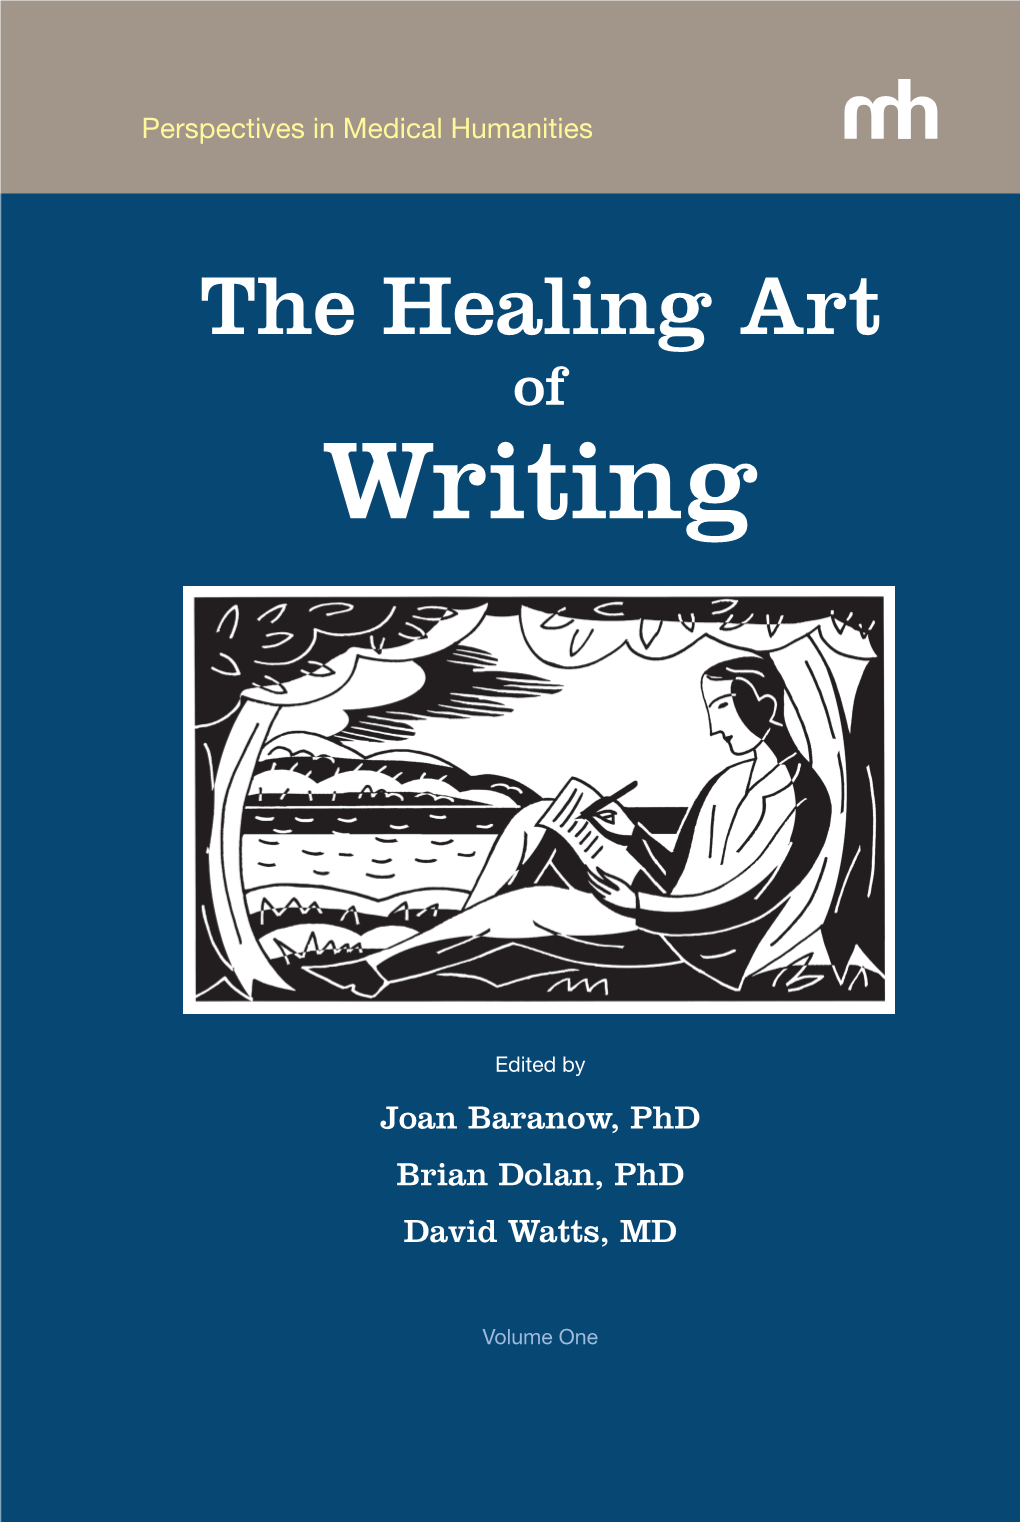 The Healing Art of Writing: Volume One Originated at the Conference of This Name That Brought Together Caregivers and Patients Who Share a Passion For